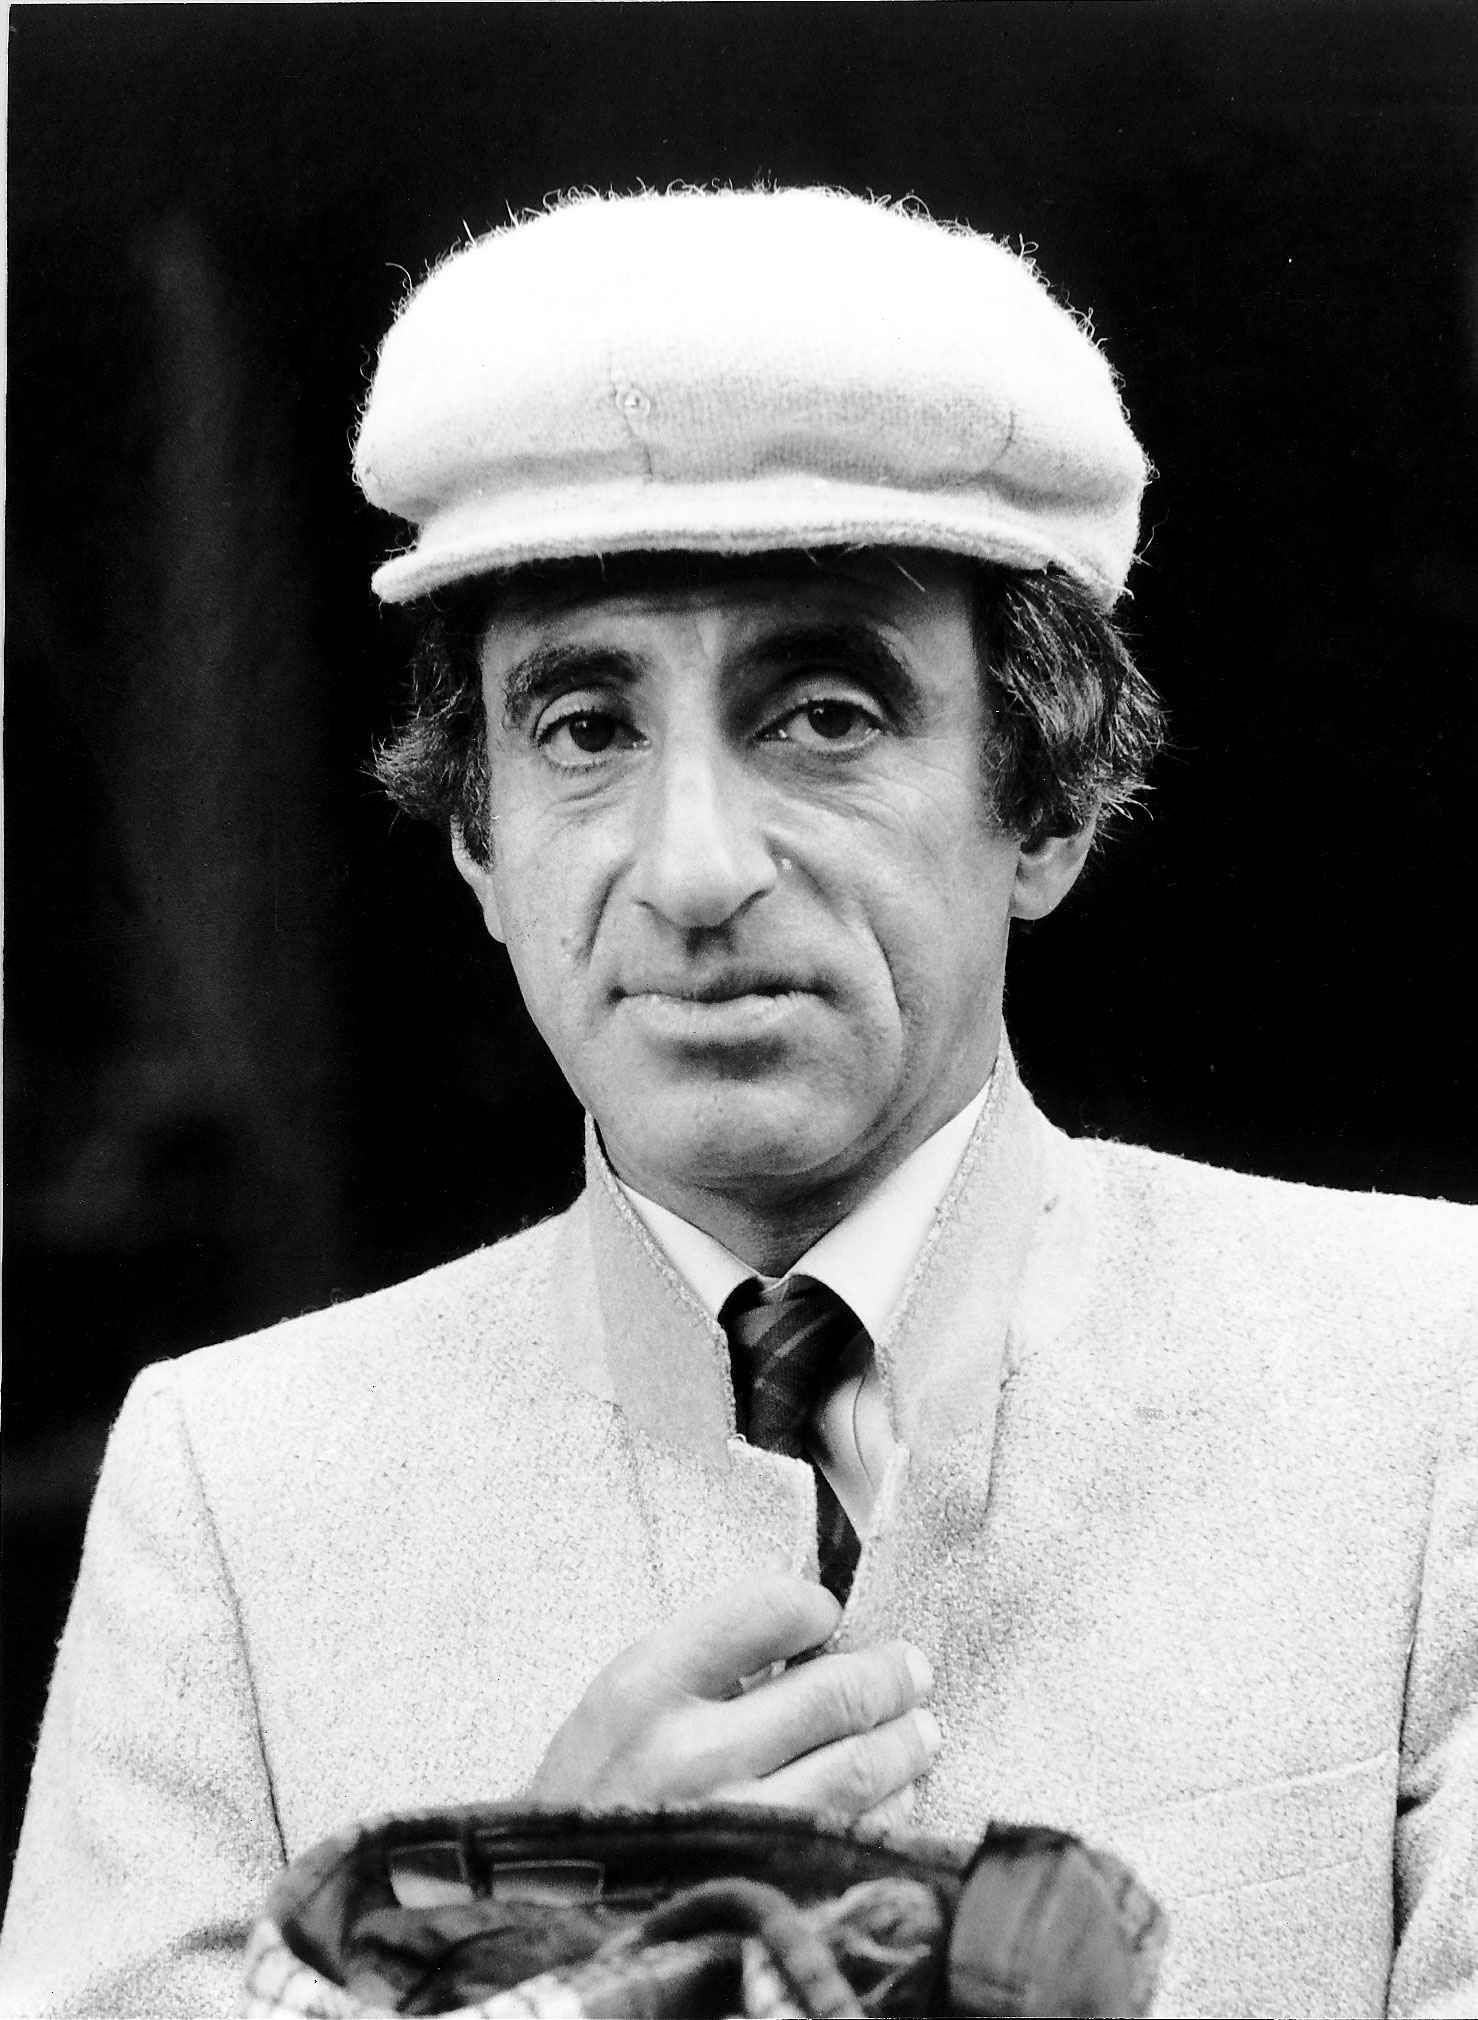 Jamie Farr as Corporal Klinger in the television series "M*A*S*H" on August 13, 1980 | Source: Getty Images